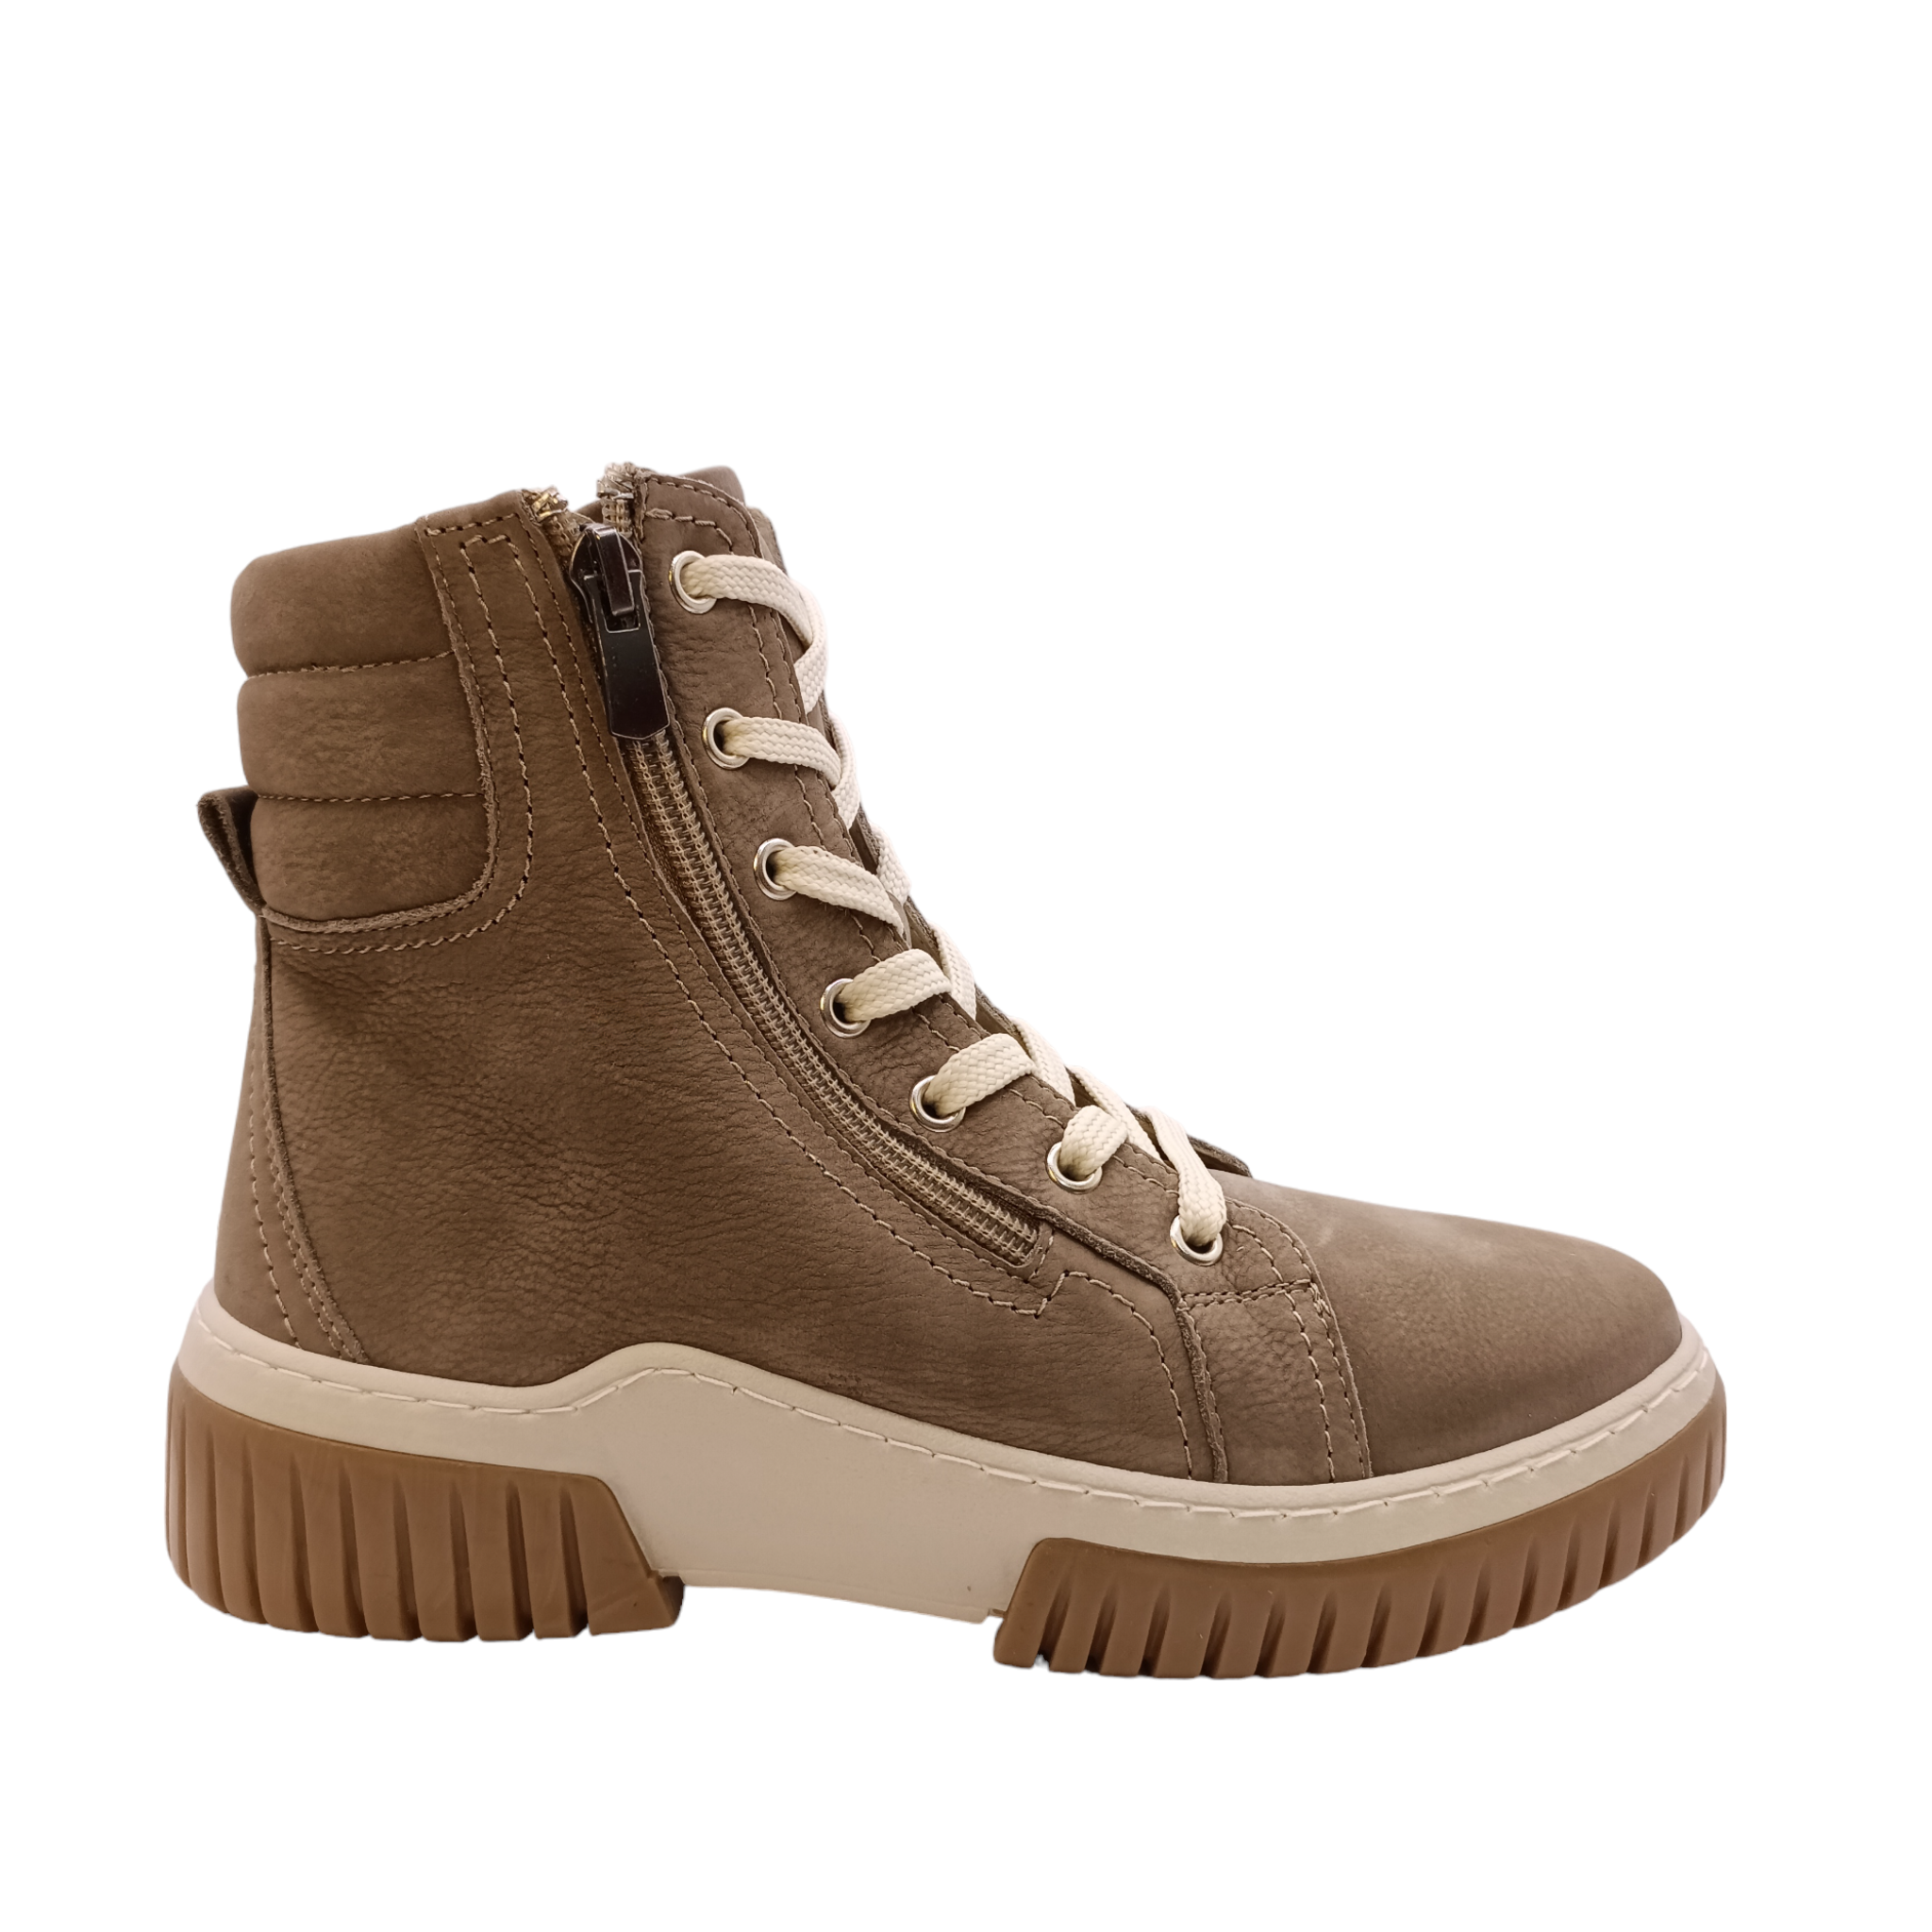 Side angled view of the boot Petra from Cabello. Soft Turkish taupe coloured leather boot with side zip and light coloured sole and laces. Padded ankle with ruggered grip. Shop Womens Boots Online and In-store with shoe&me Mount Maunganui Tauranga NZ.